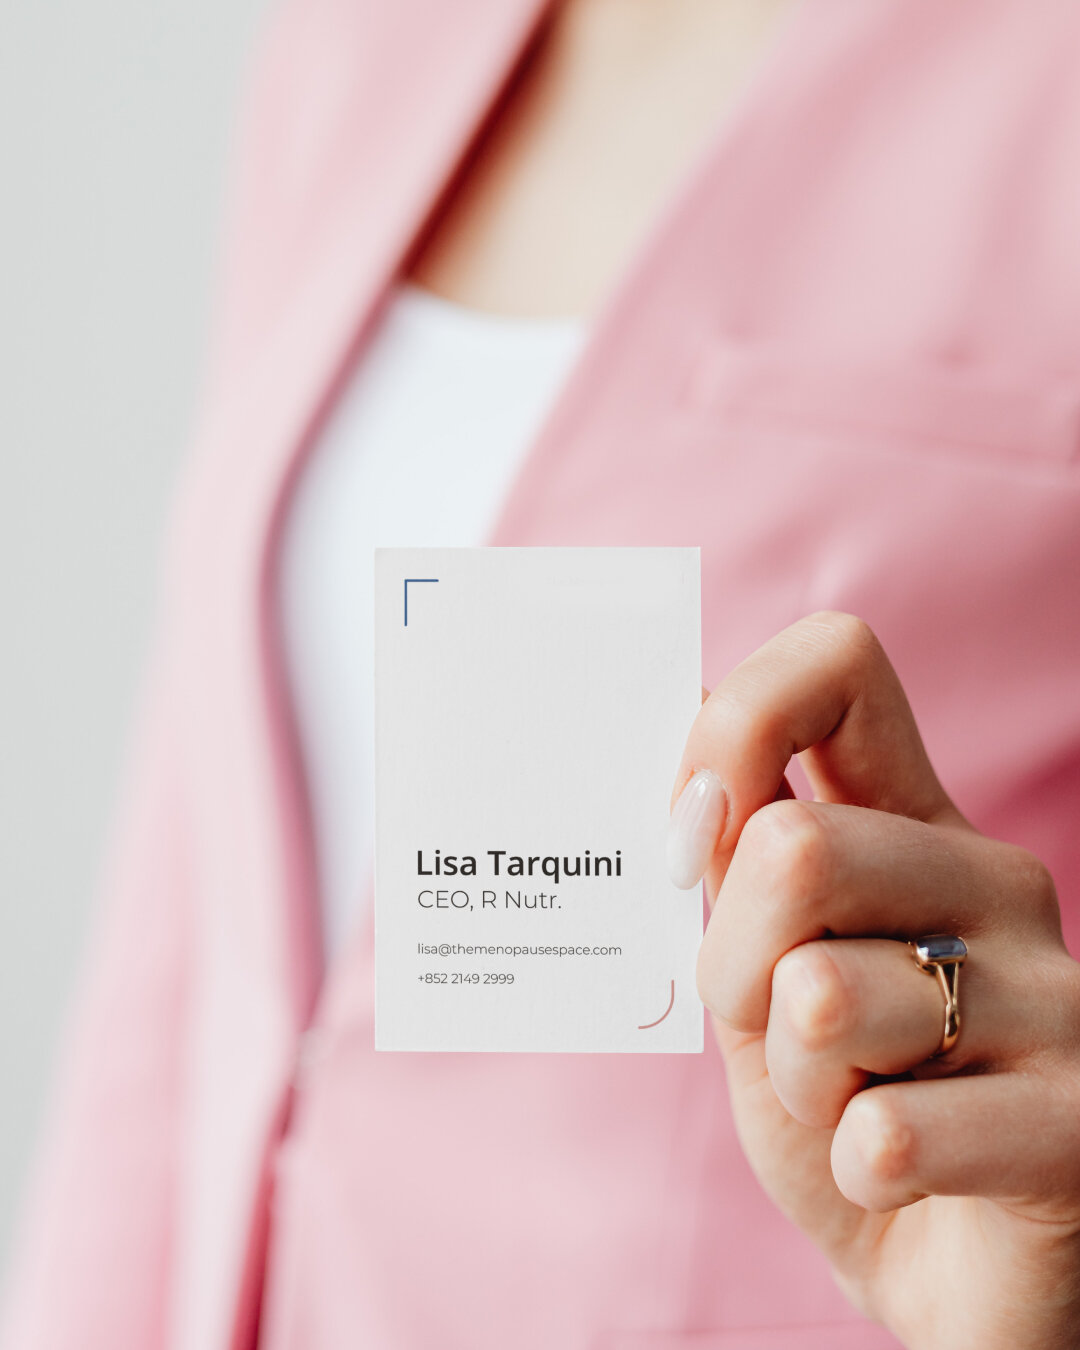 When @lt_nutritionist Lisa Tarquini first approached Arcana Studio and @atthetable.hk way back in December 2022, she was looking for help crafting an educational book about nutrition and menopause.

Now fast forward to today in 2023, we&rsquo;ve sinc